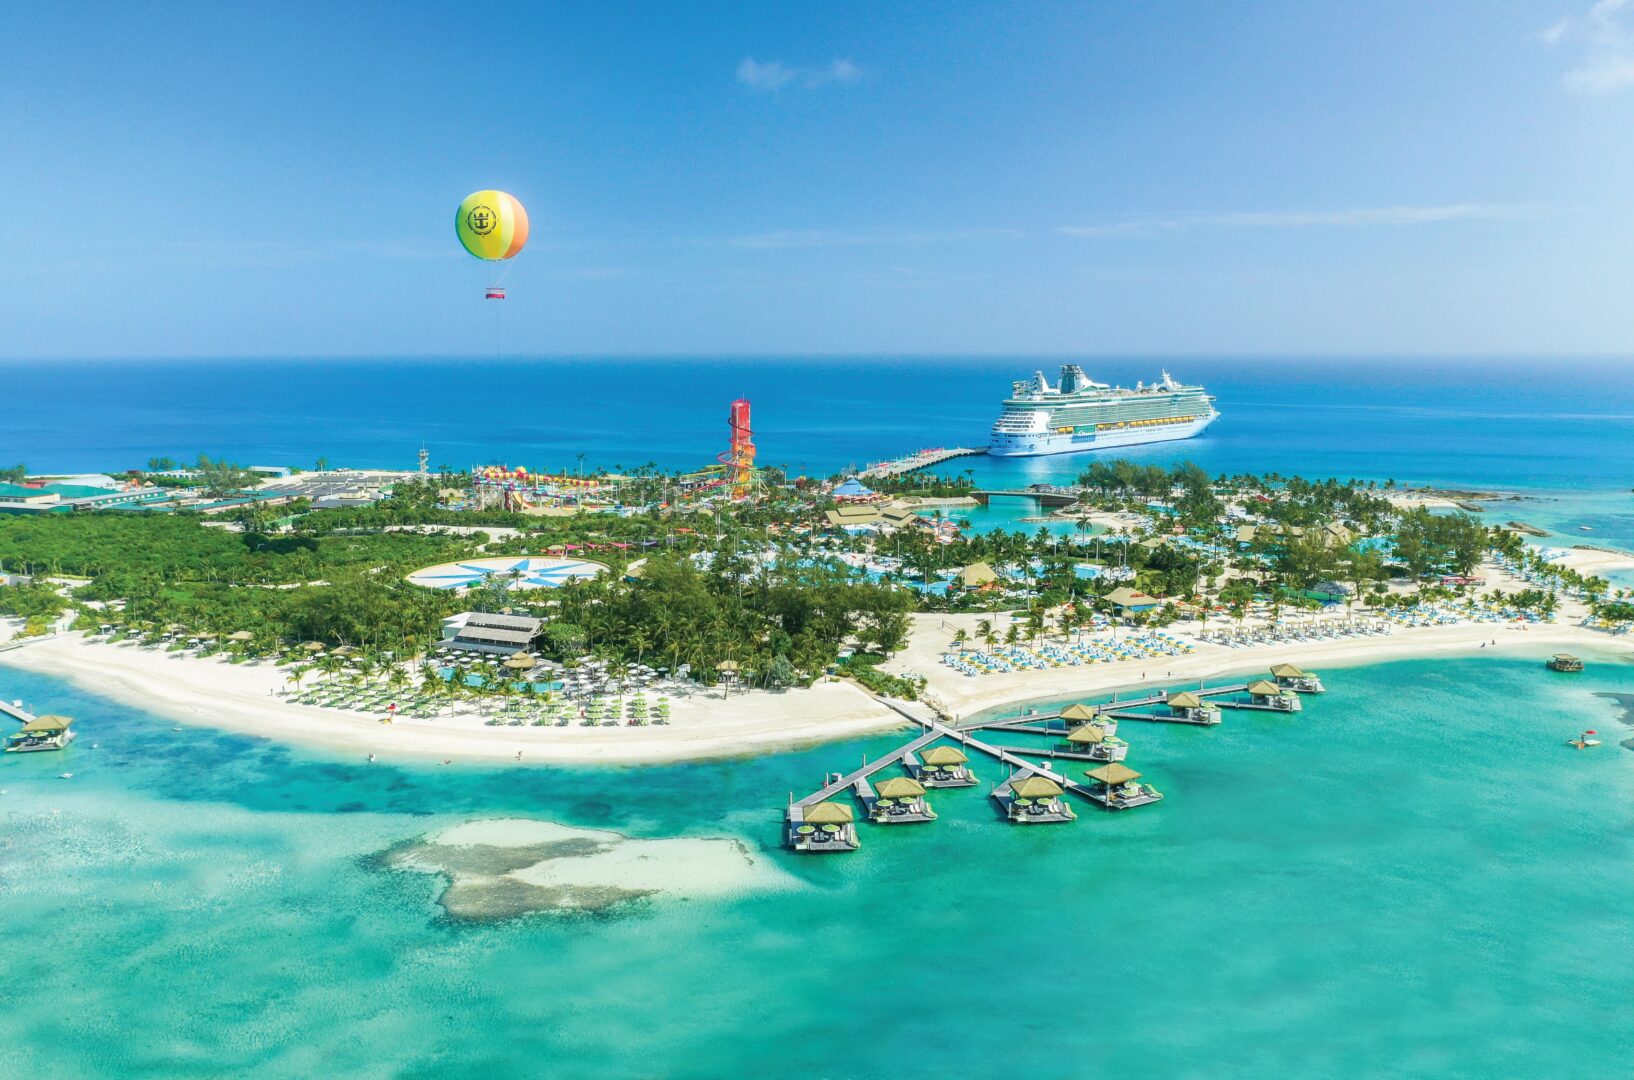 Royal Caribbean is offering up to $650 off + 30% off every cruise + kids sail free for Spring